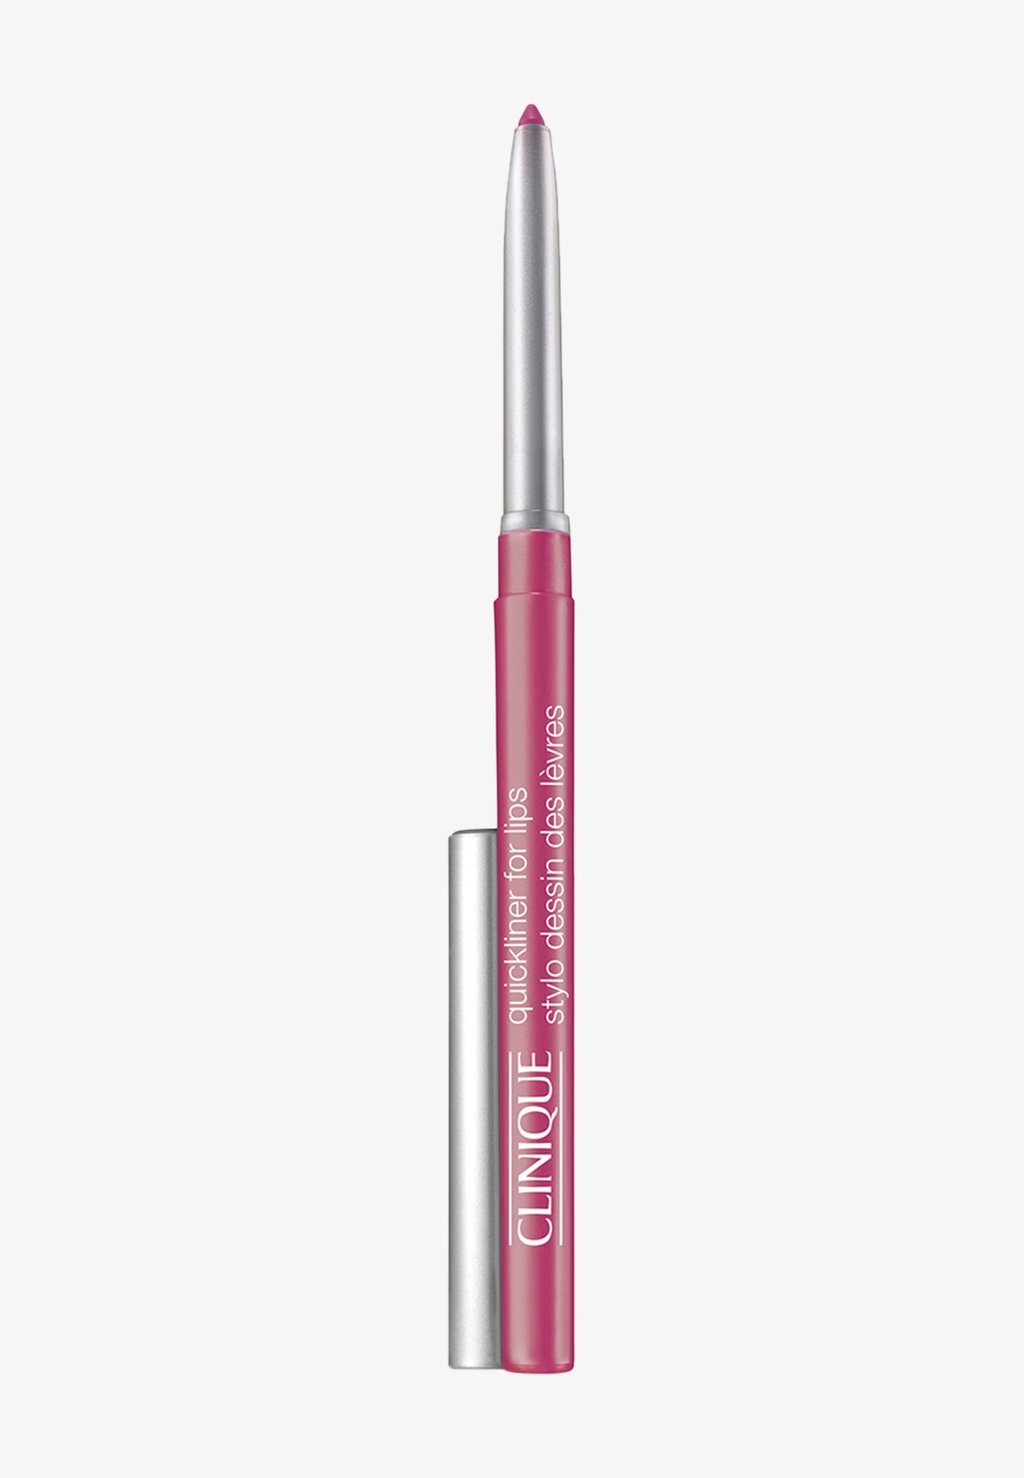 Карандаш для губ Quickliner For Lips Clinique, цвет crushed berry